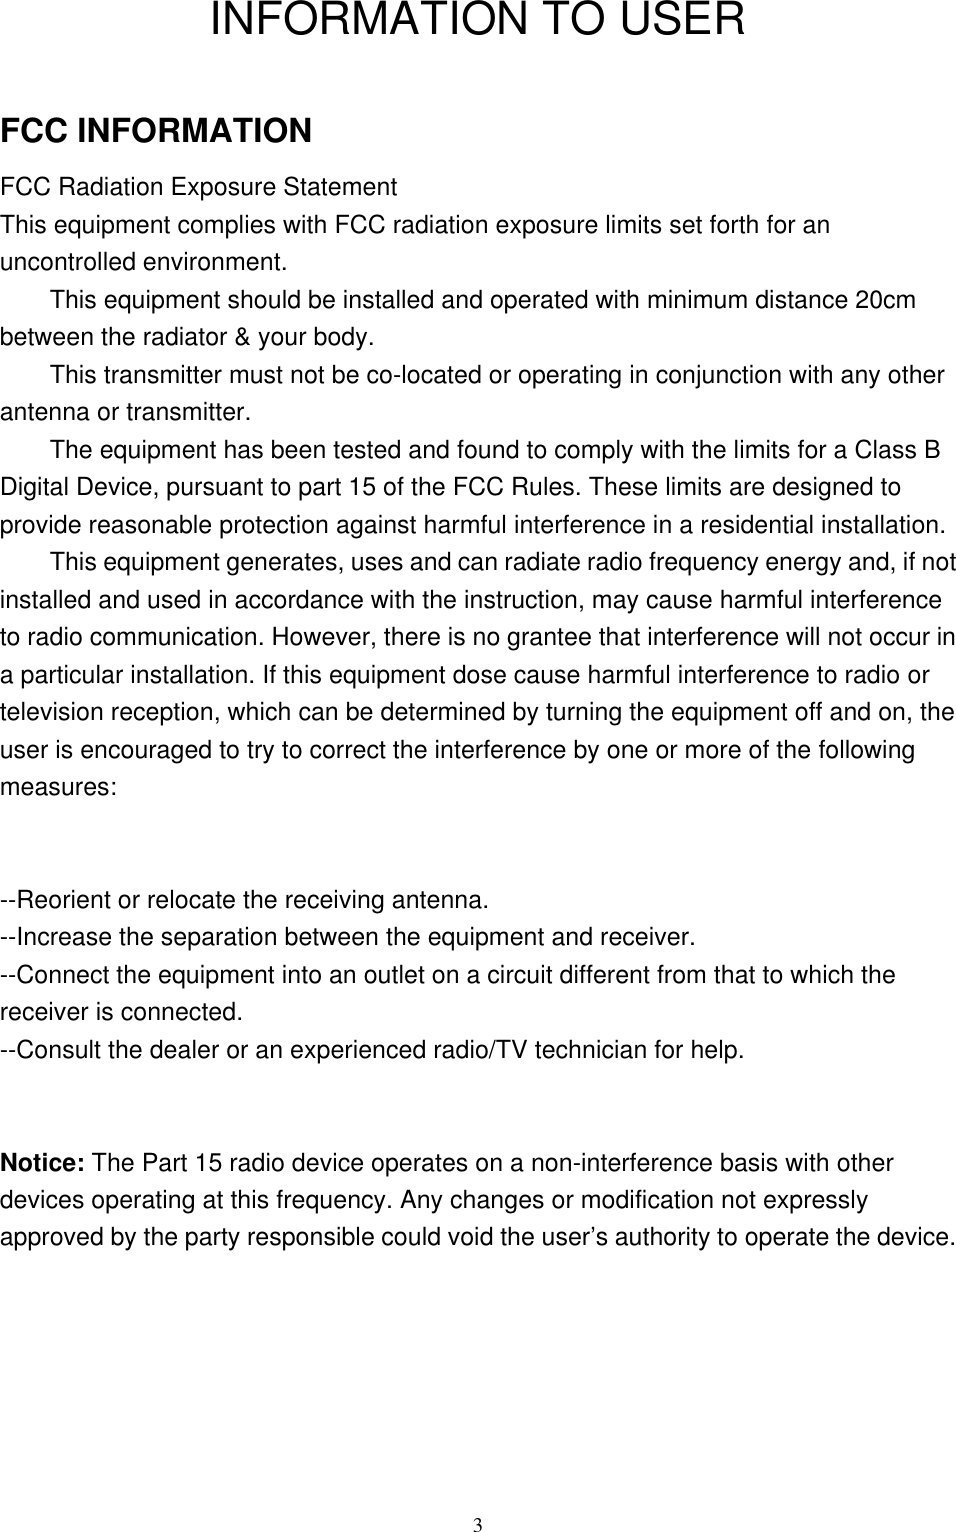 3INFORMATION TO USERFCC INFORMATIONFCC Radiation Exposure StatementThis equipment complies with FCC radiation exposure limits set forth for anuncontrolled environment.This equipment should be installed and operated with minimum distance 20cmbetween the radiator &amp; your body.This transmitter must not be co-located or operating in conjunction with any otherantenna or transmitter.The equipment has been tested and found to comply with the limits for a Class BDigital Device, pursuant to part 15 of the FCC Rules. These limits are designed toprovide reasonable protection against harmful interference in a residential installation.This equipment generates, uses and can radiate radio frequency energy and, if notinstalled and used in accordance with the instruction, may cause harmful interferenceto radio communication. However, there is no grantee that interference will not occur ina particular installation. If this equipment dose cause harmful interference to radio ortelevision reception, which can be determined by turning the equipment off and on, theuser is encouraged to try to correct the interference by one or more of the followingmeasures:--Reorient or relocate the receiving antenna.--Increase the separation between the equipment and receiver.--Connect the equipment into an outlet on a circuit different from that to which thereceiver is connected.--Consult the dealer or an experienced radio/TV technician for help.Notice: The Part 15 radio device operates on a non-interference basis with otherdevices operating at this frequency. Any changes or modification not expresslyapproved by the party responsible could void the user’s authority to operate the device.